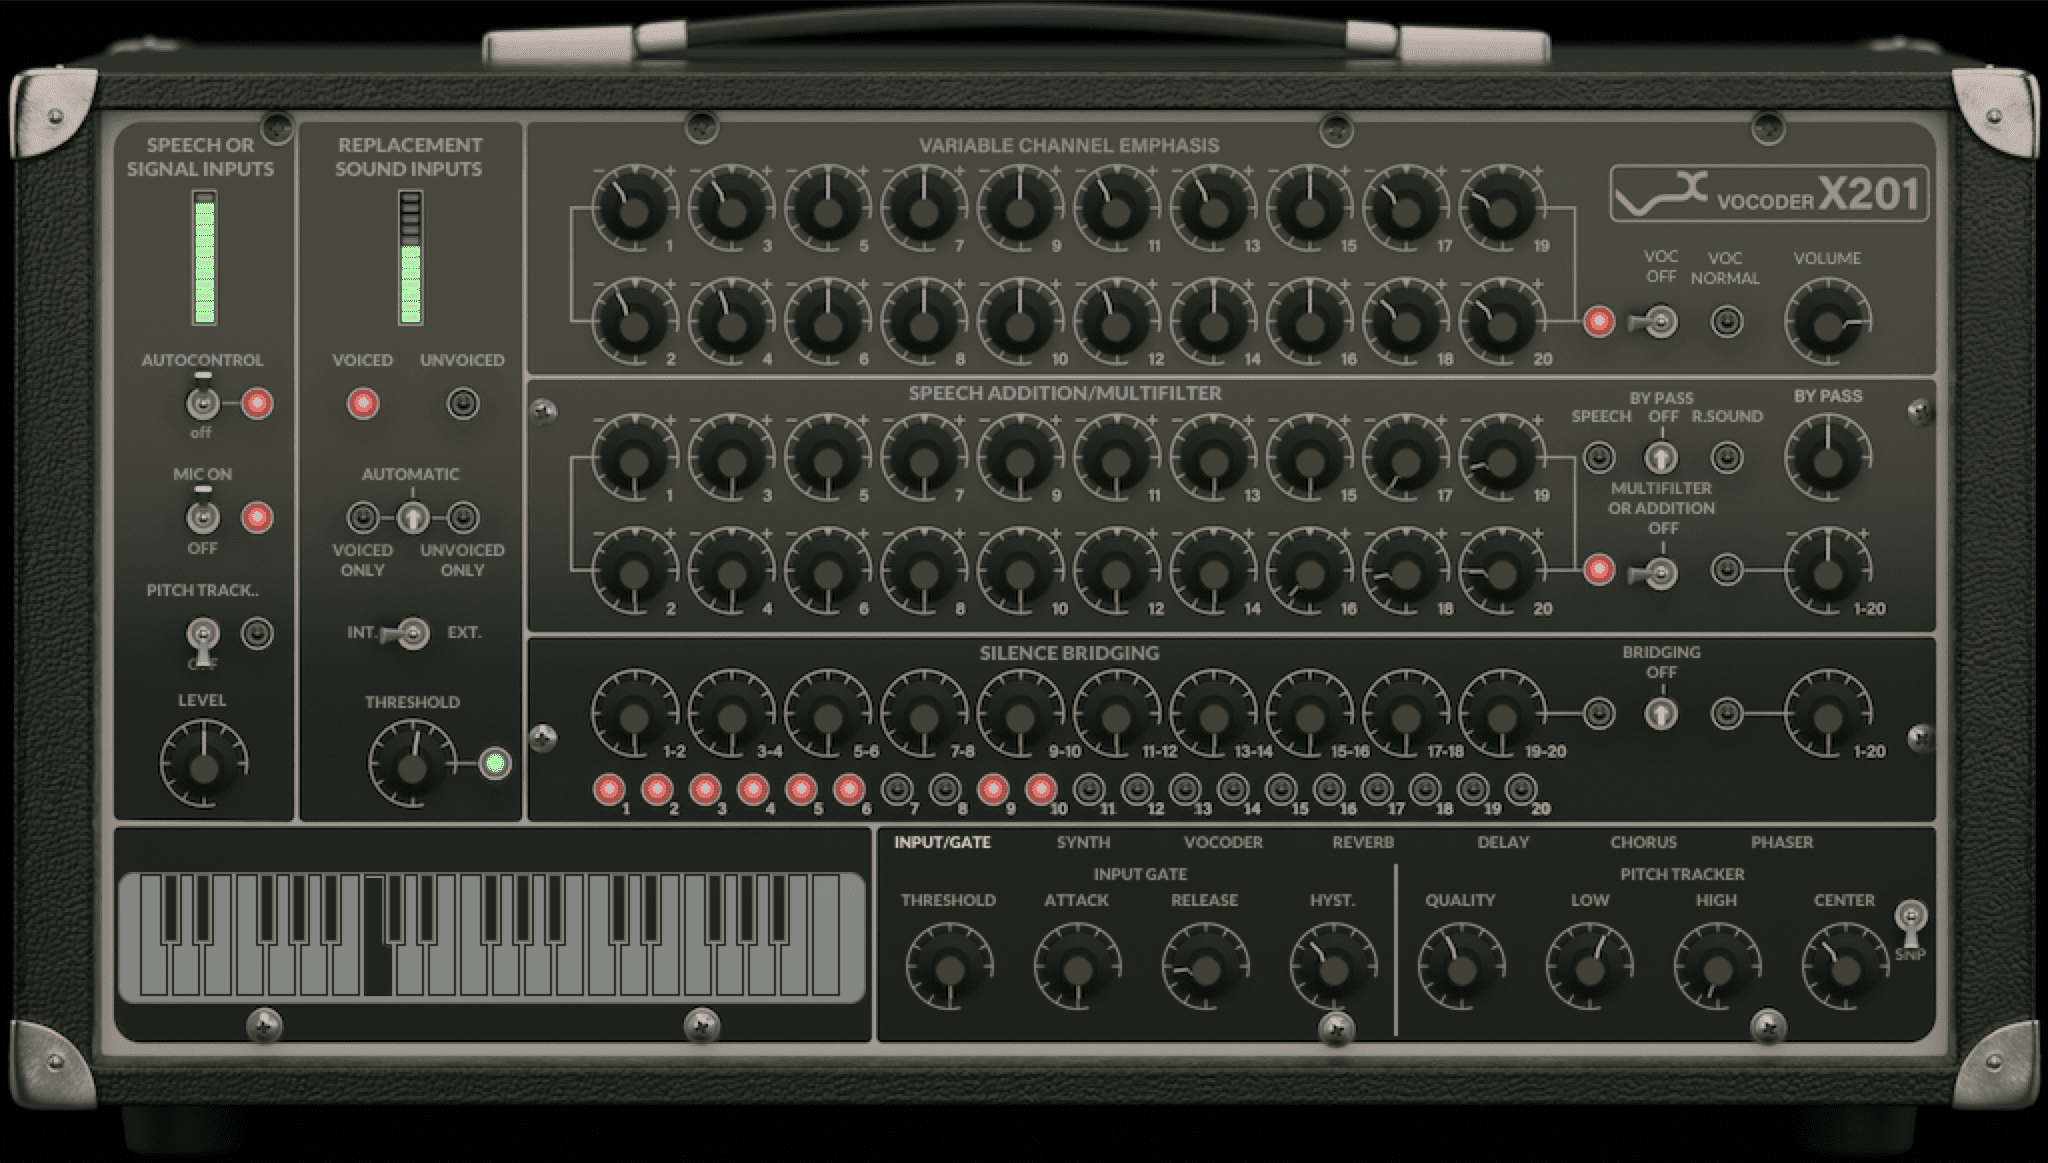 XILS-lab Launches XILS 201 Vocoder and Vintage Synth